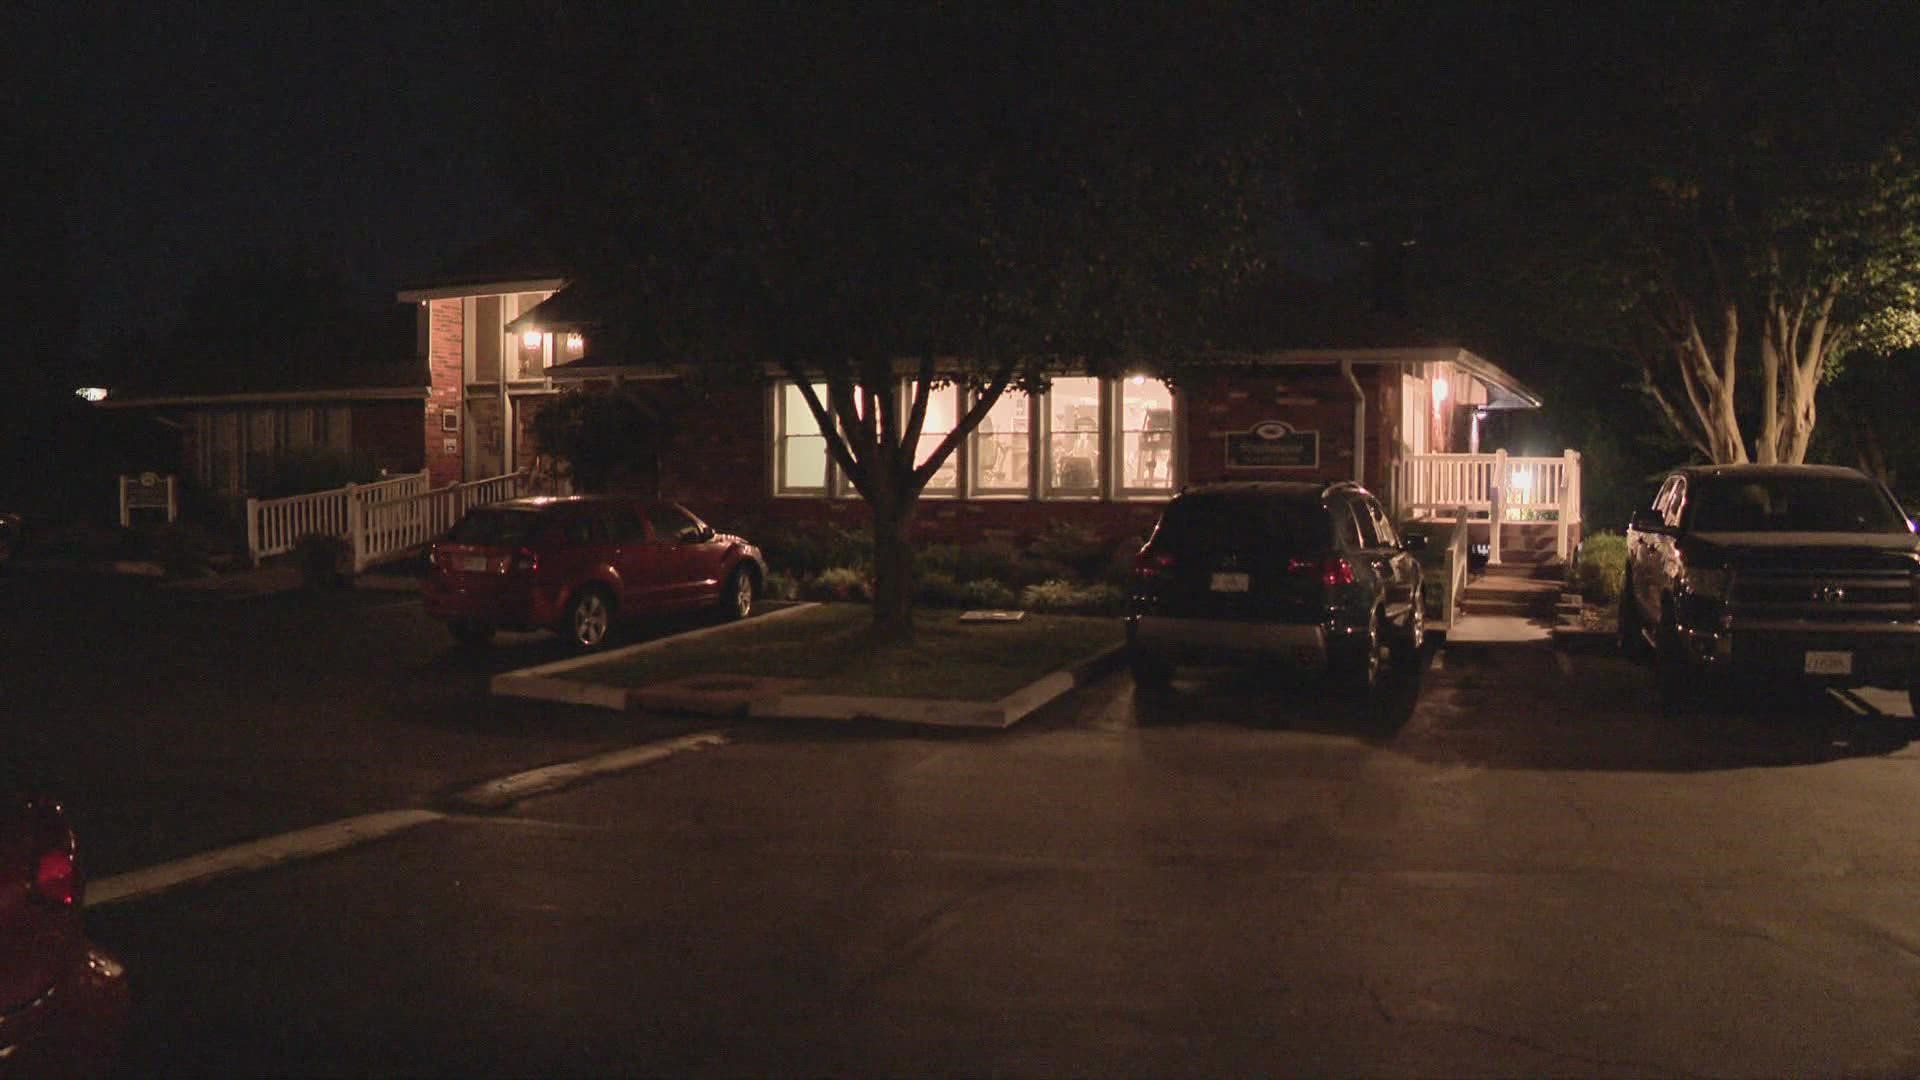 A woman was killed and another was injured in a shooting at a St. Louis County apartment complex, police said. The shooting happened at a complex on Golf Ridge Lane.